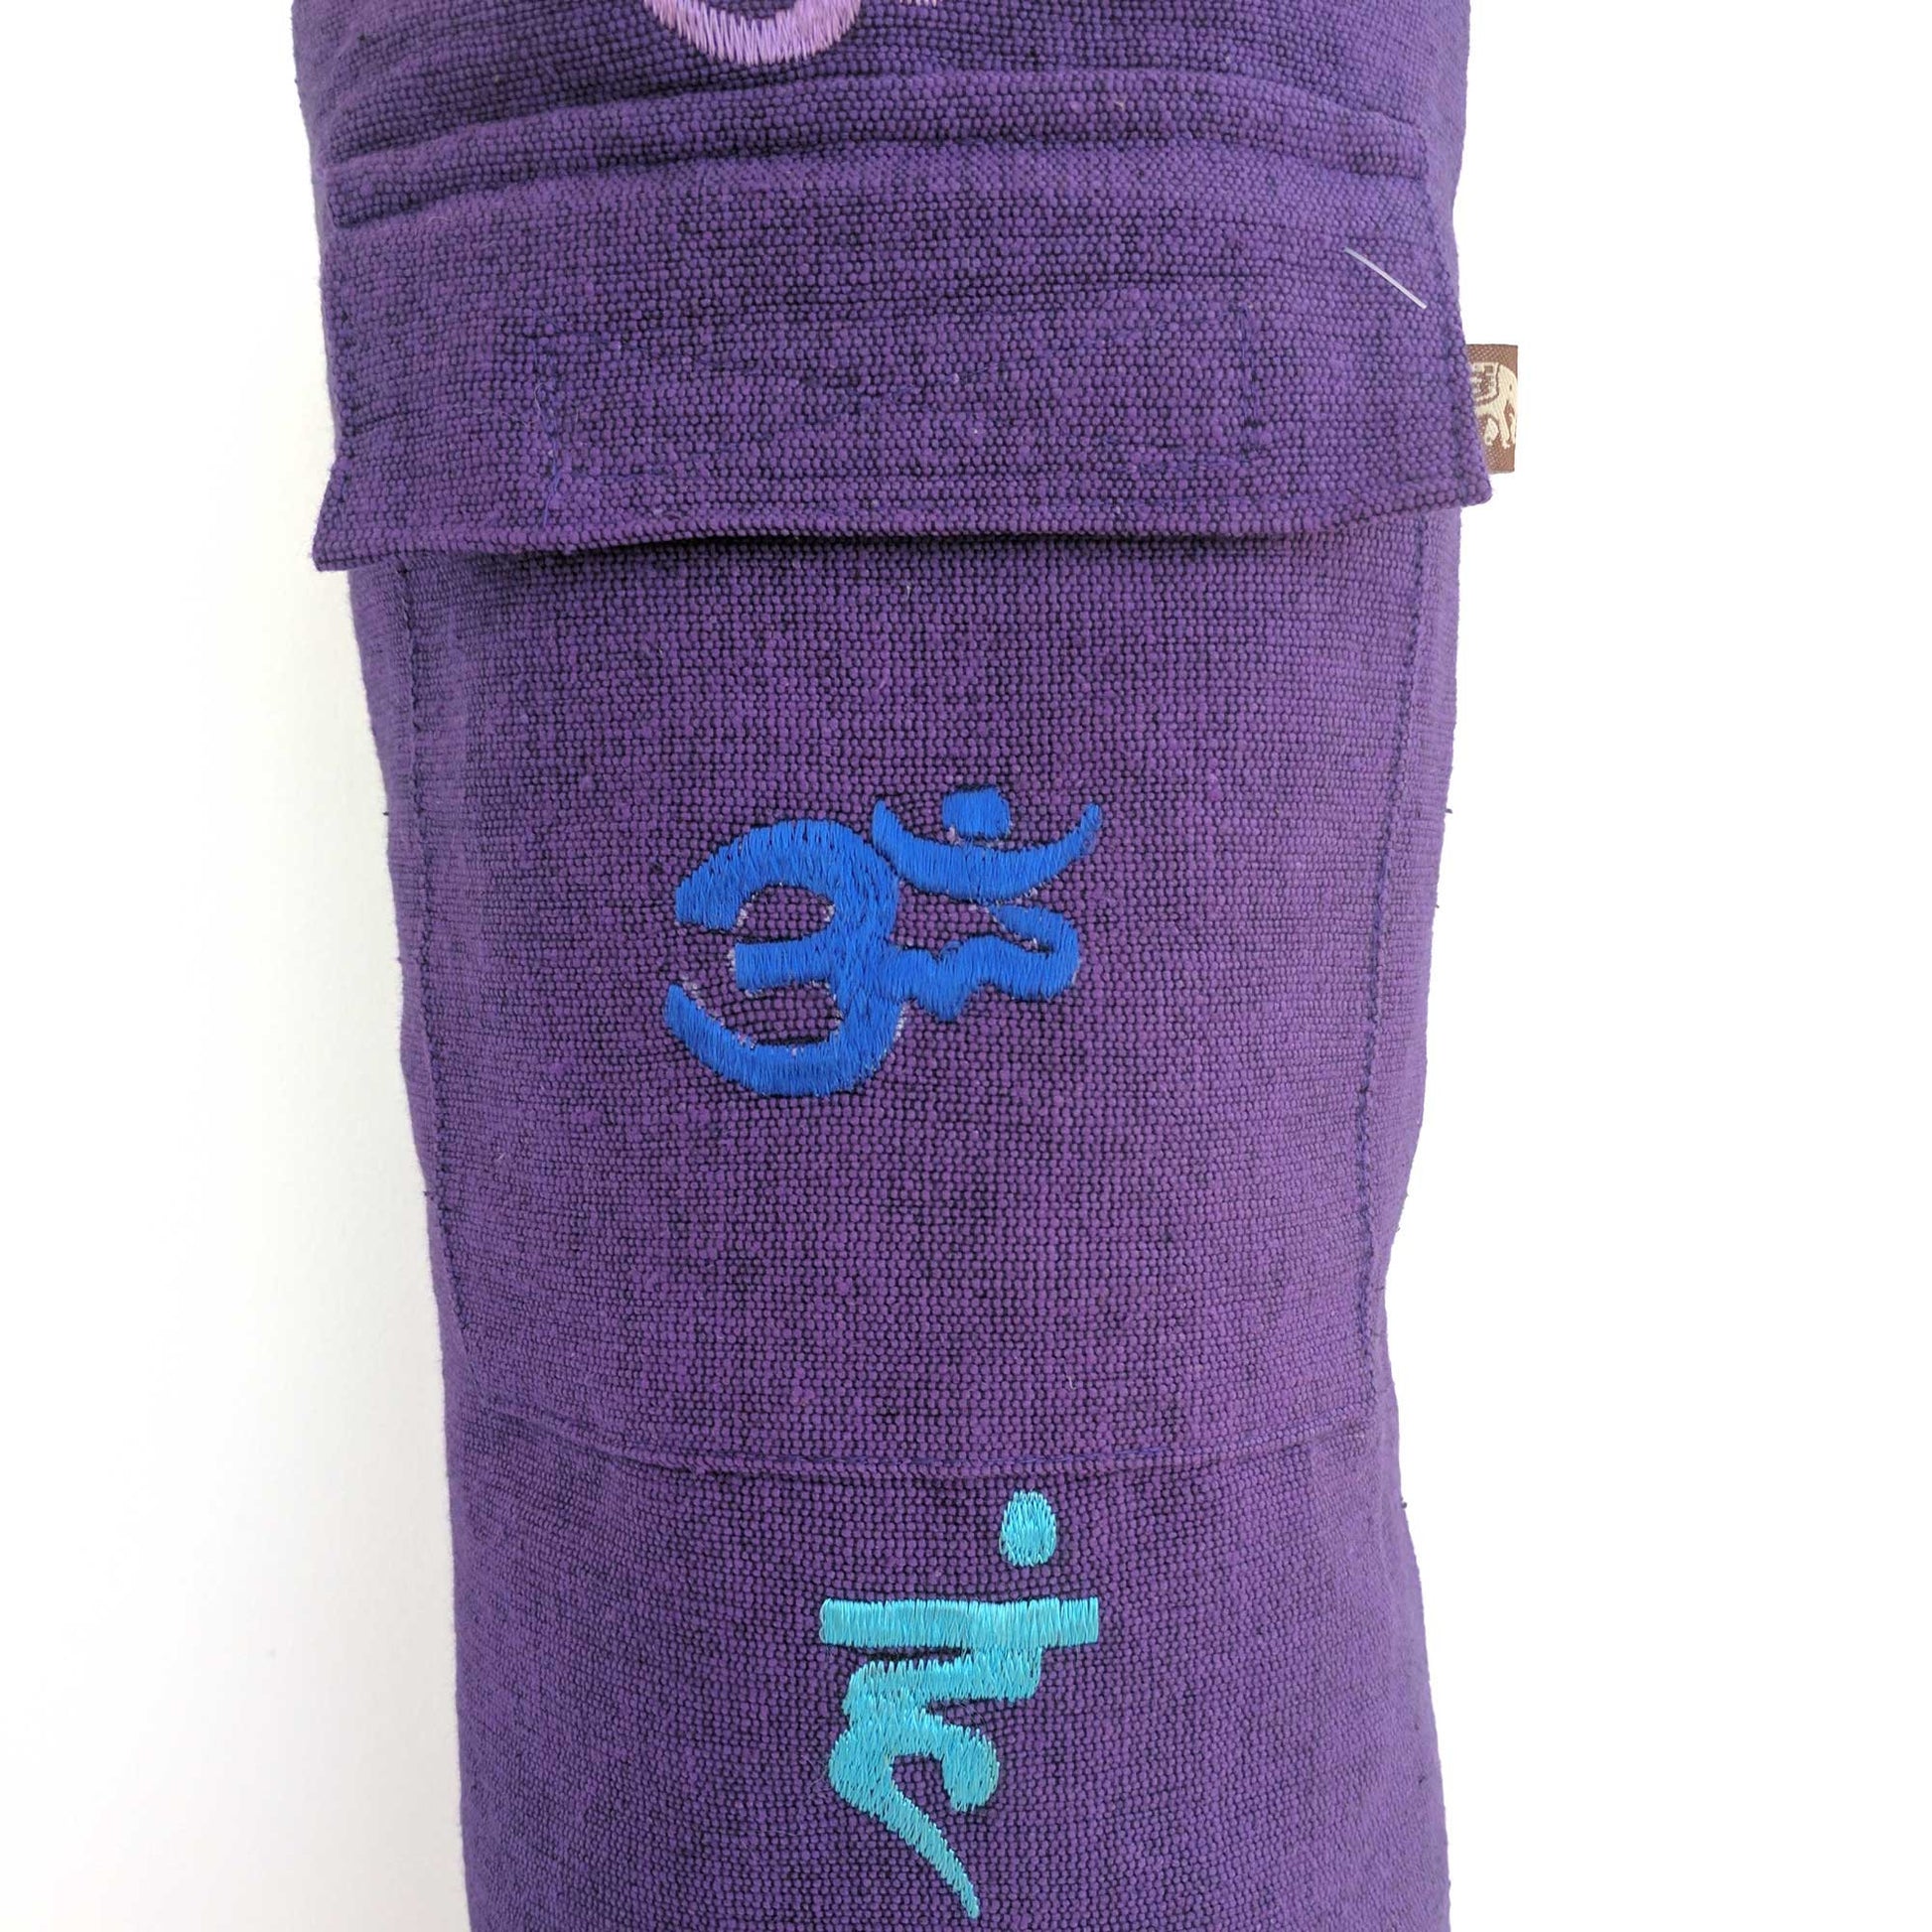 Yoga Mat Bag Om Symbols with hand-embroidery